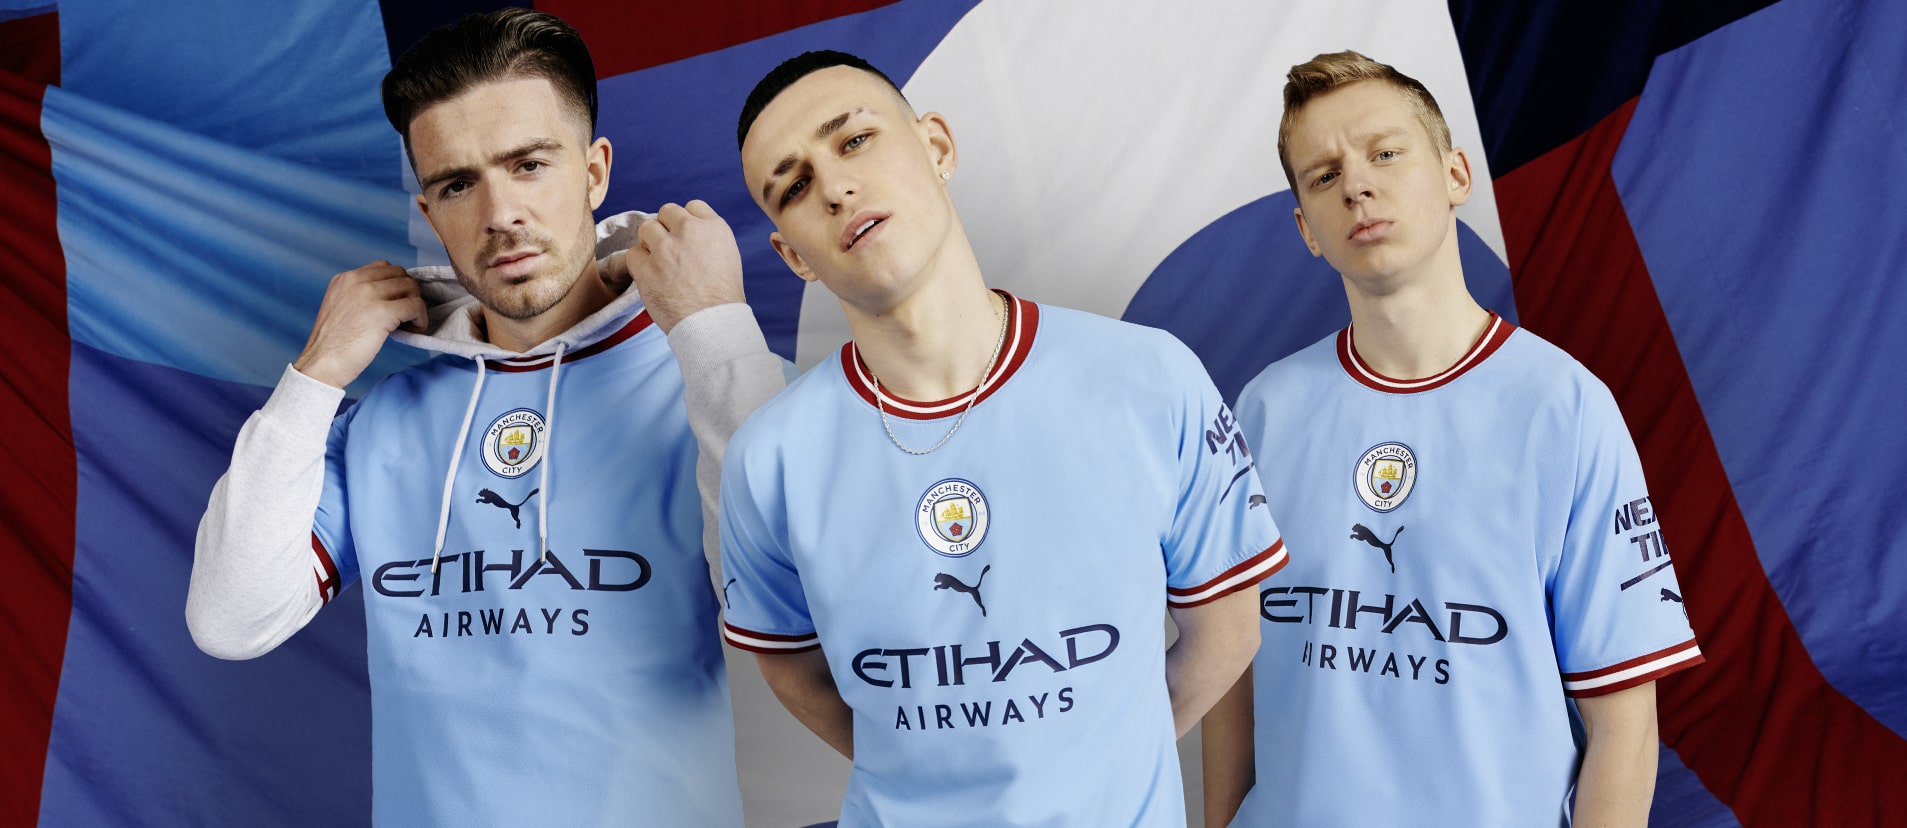 Manchester City Celebrate Iconic Teams Of The Past And Club Legend Colin Bell With The New 2022/23 Home Kit